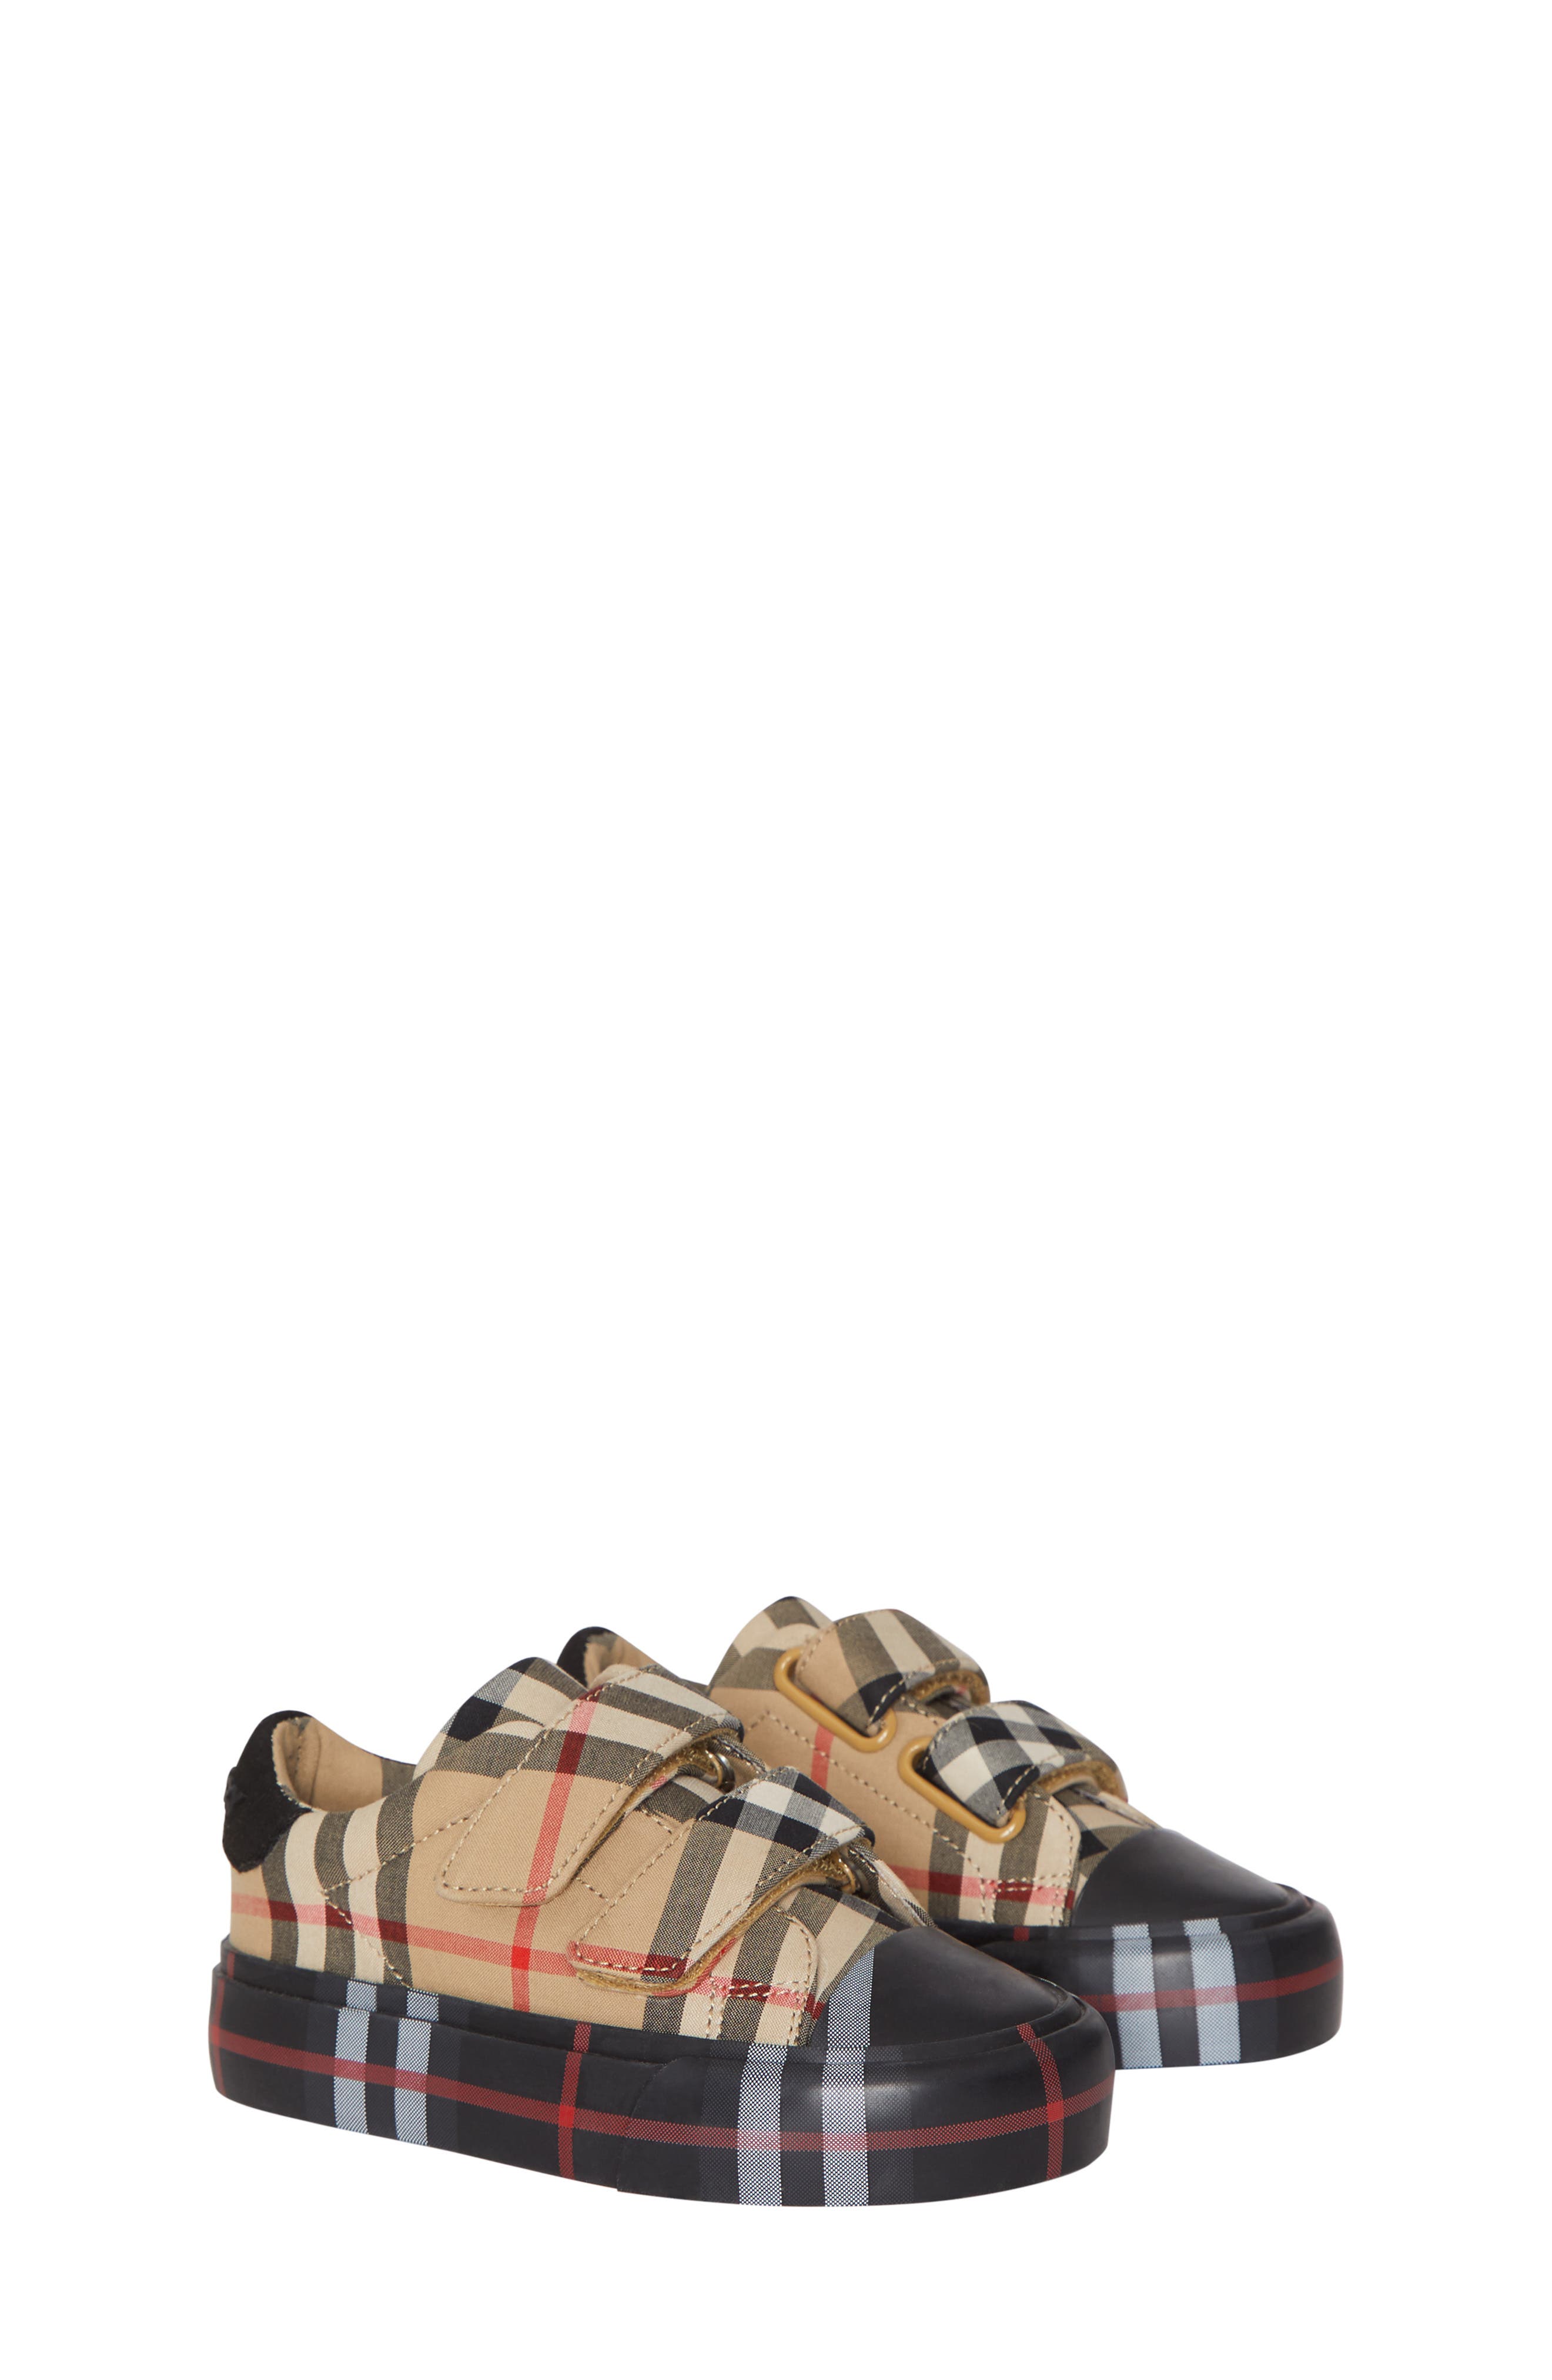 Burberry Baby Shoes Size Chart